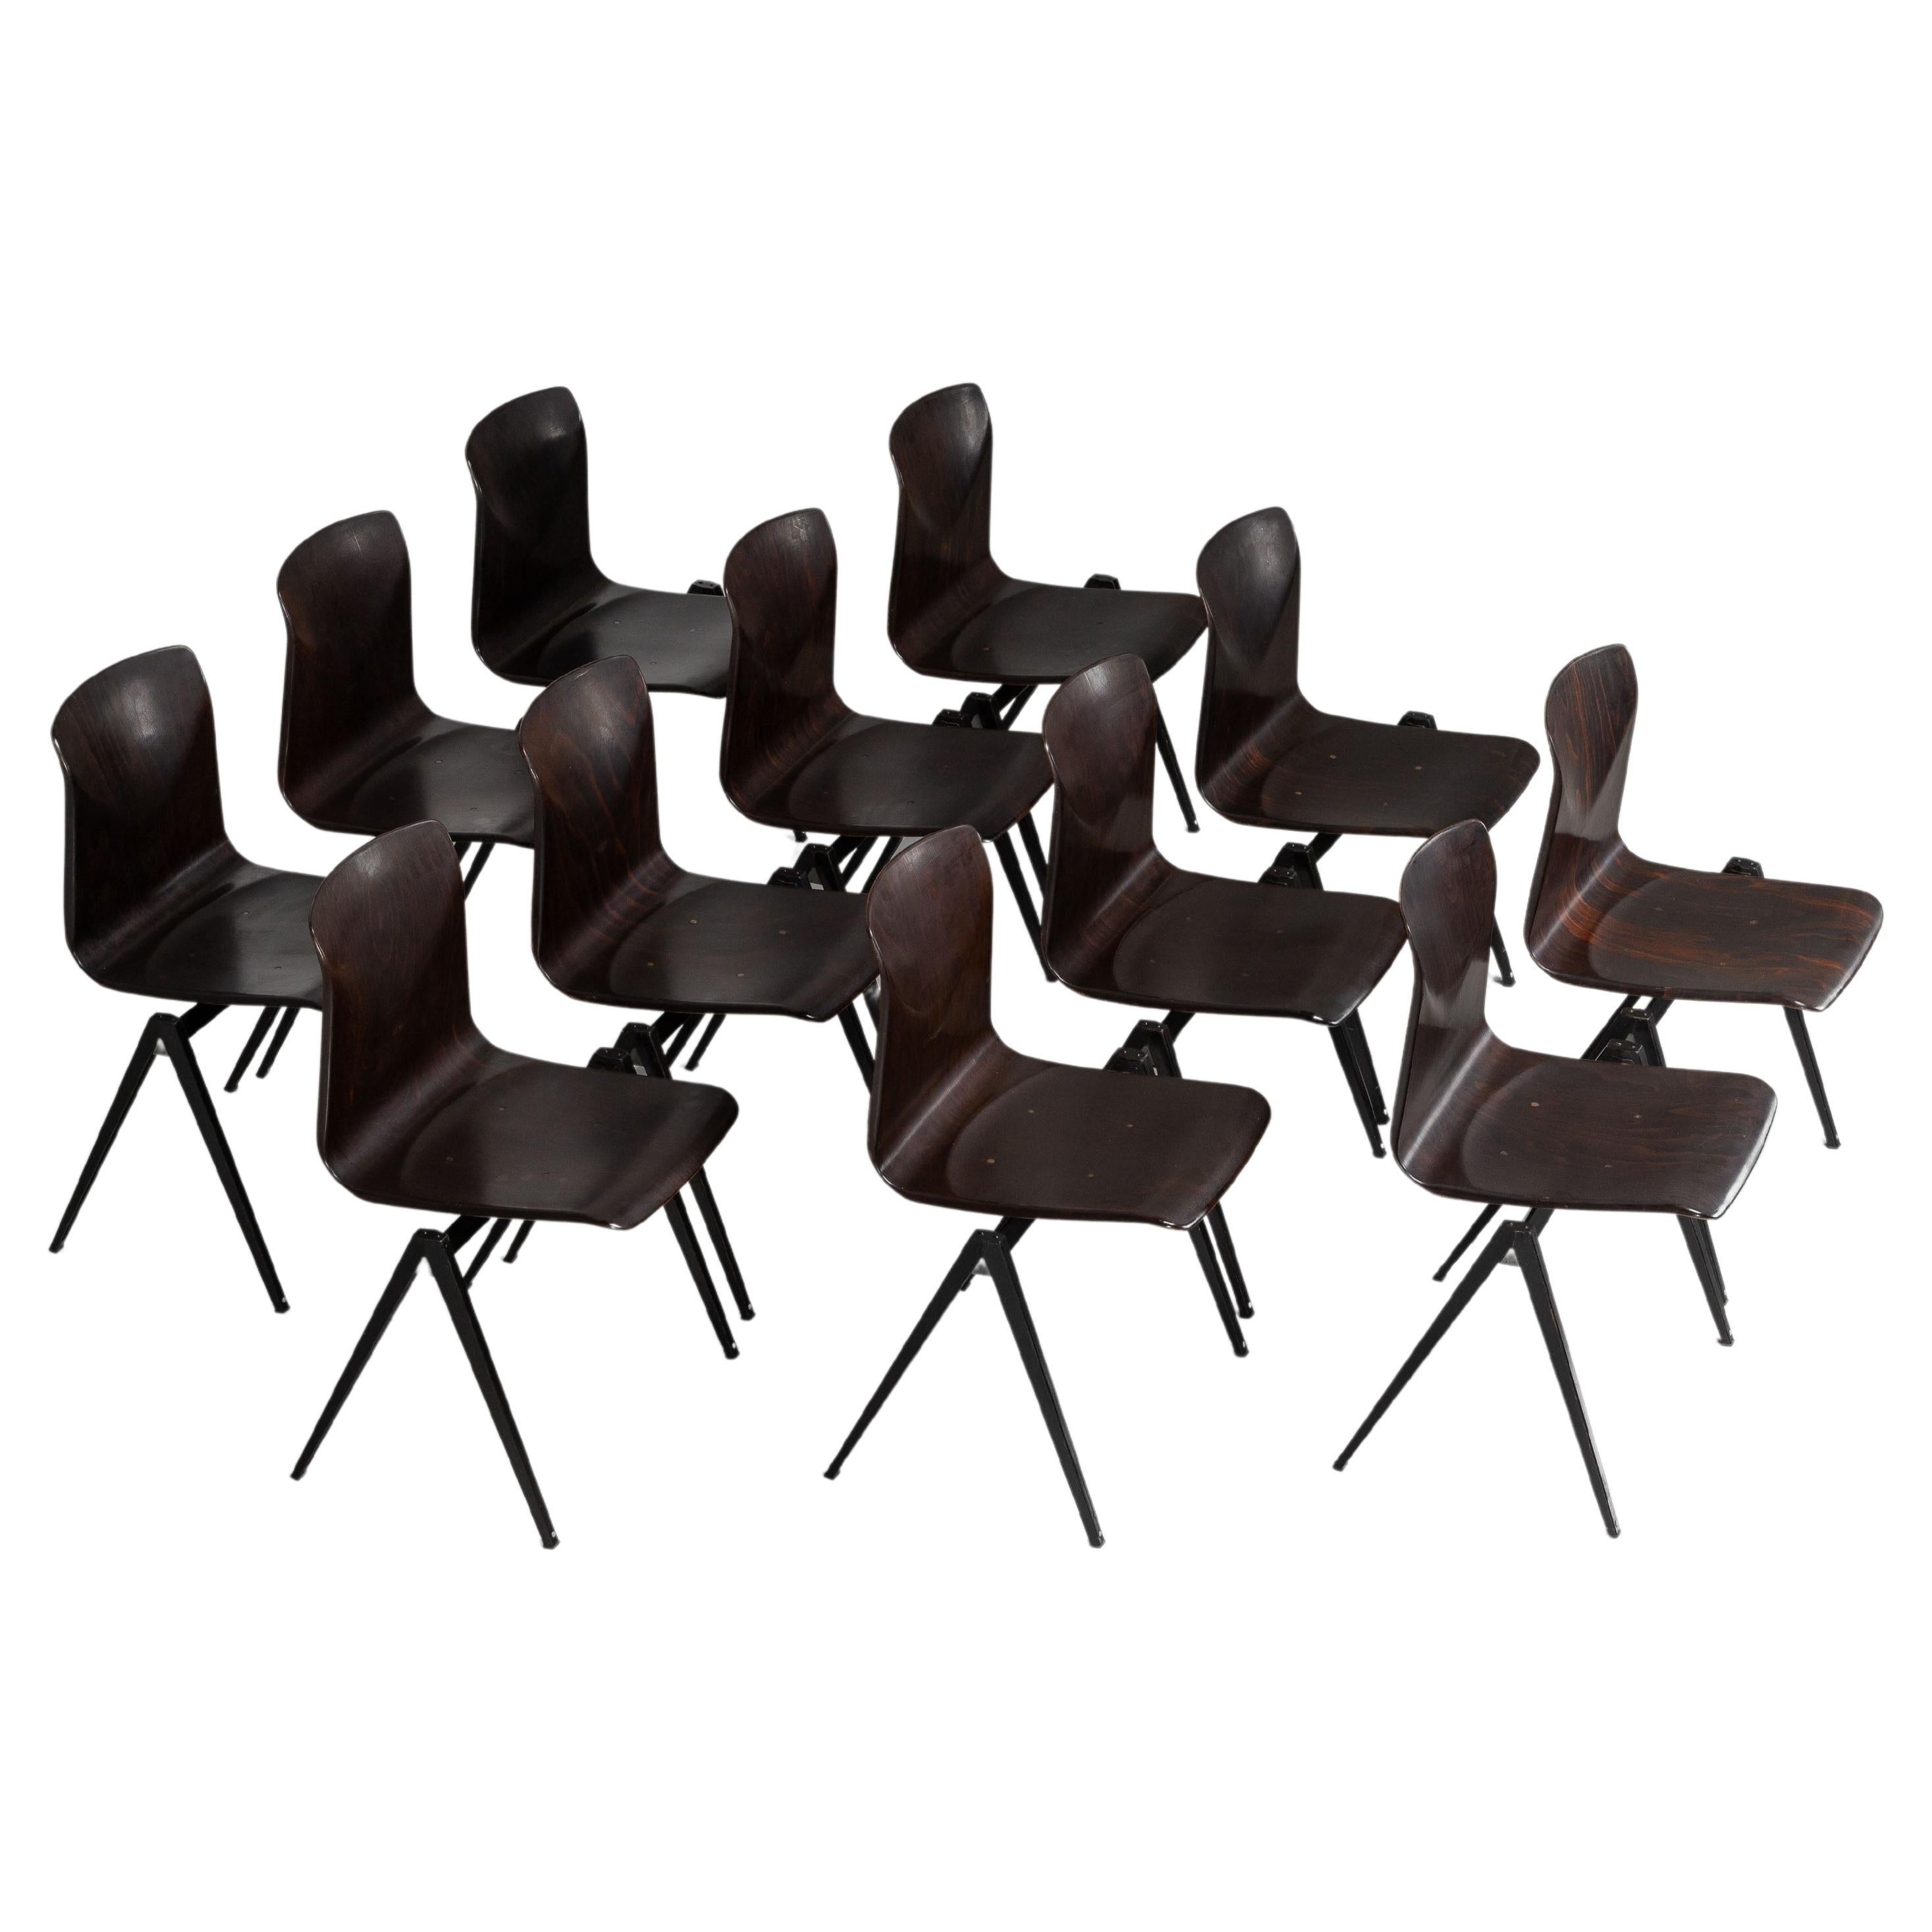 Elmar Flototto Pagholz stacking chairs Germany 1970